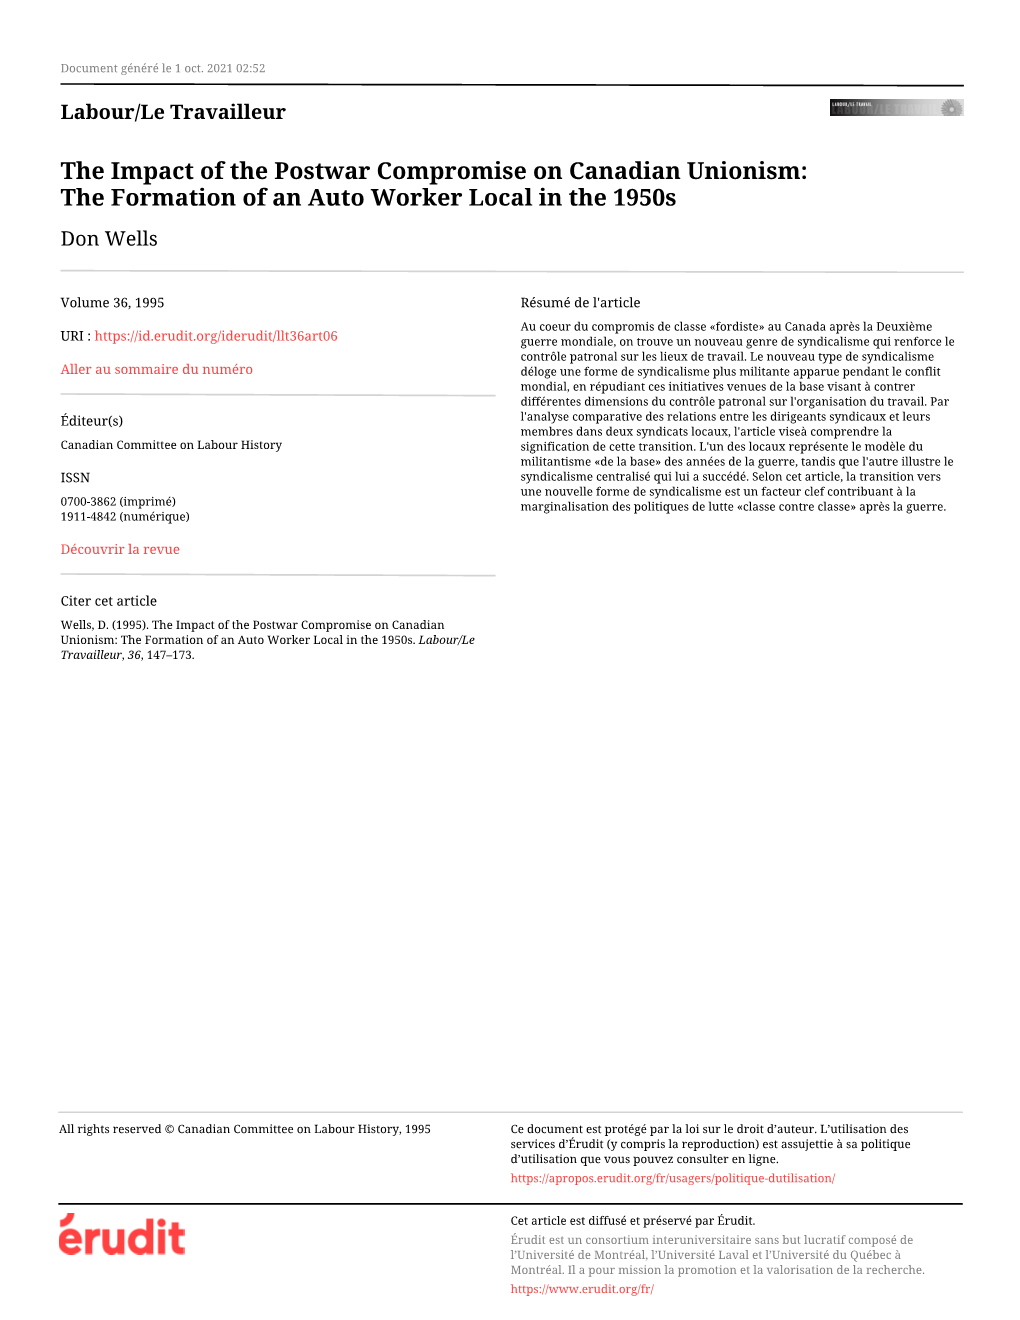 The Impact of the Postwar Compromise on Canadian Unionism: the Formation of an Auto Worker Local in the 1950S Don Wells